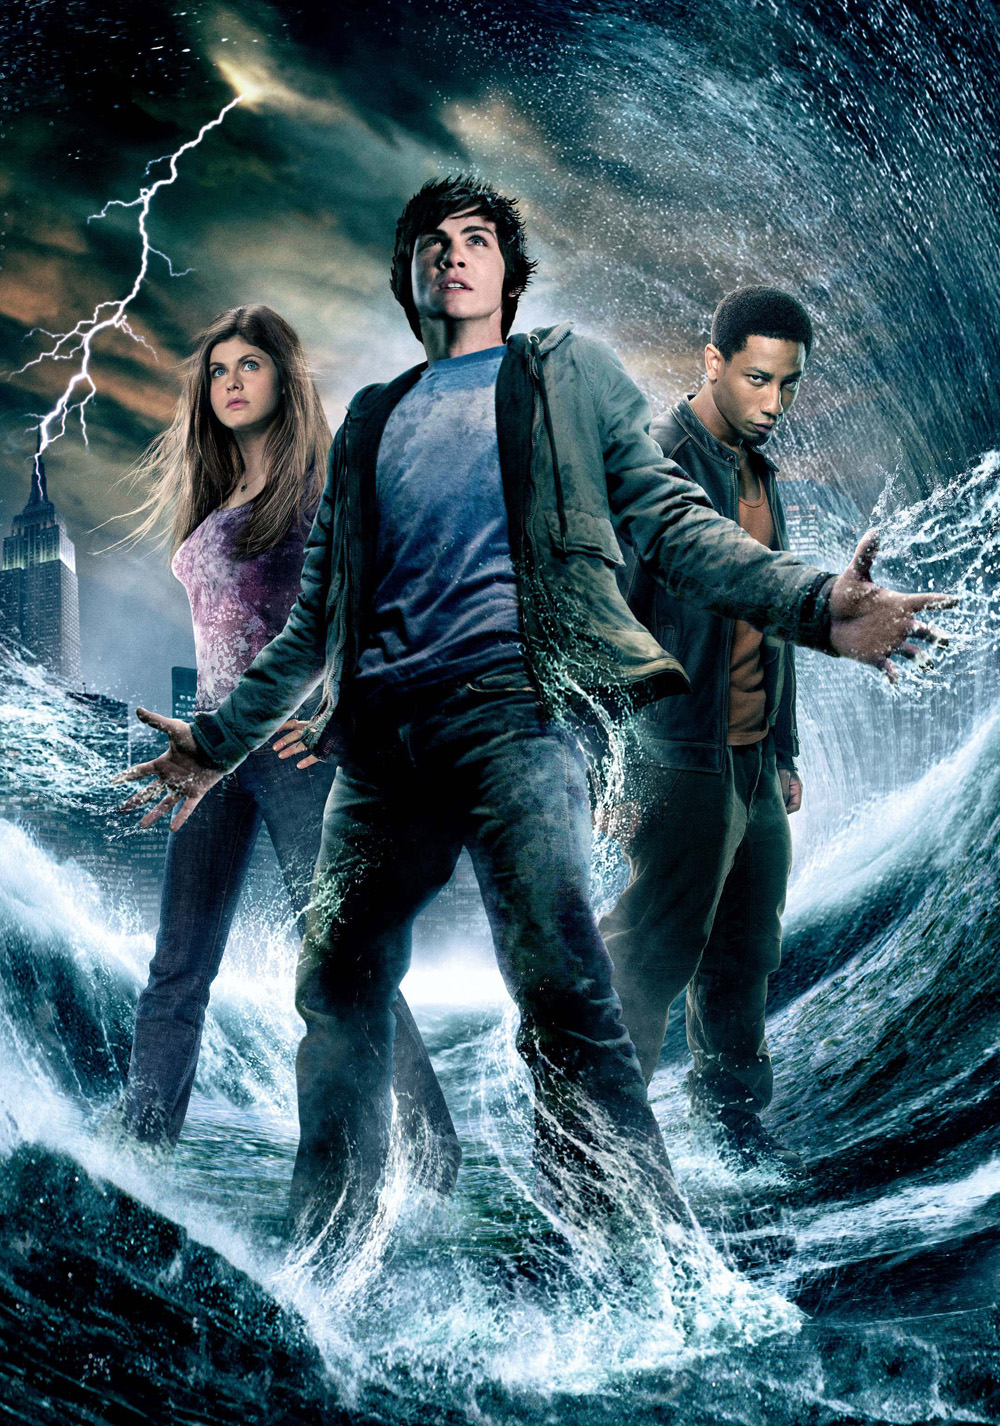 Percy Jackson & The Olympians: The Lightning Thief Backgrounds, Compatible - PC, Mobile, Gadgets| 1000x1426 px